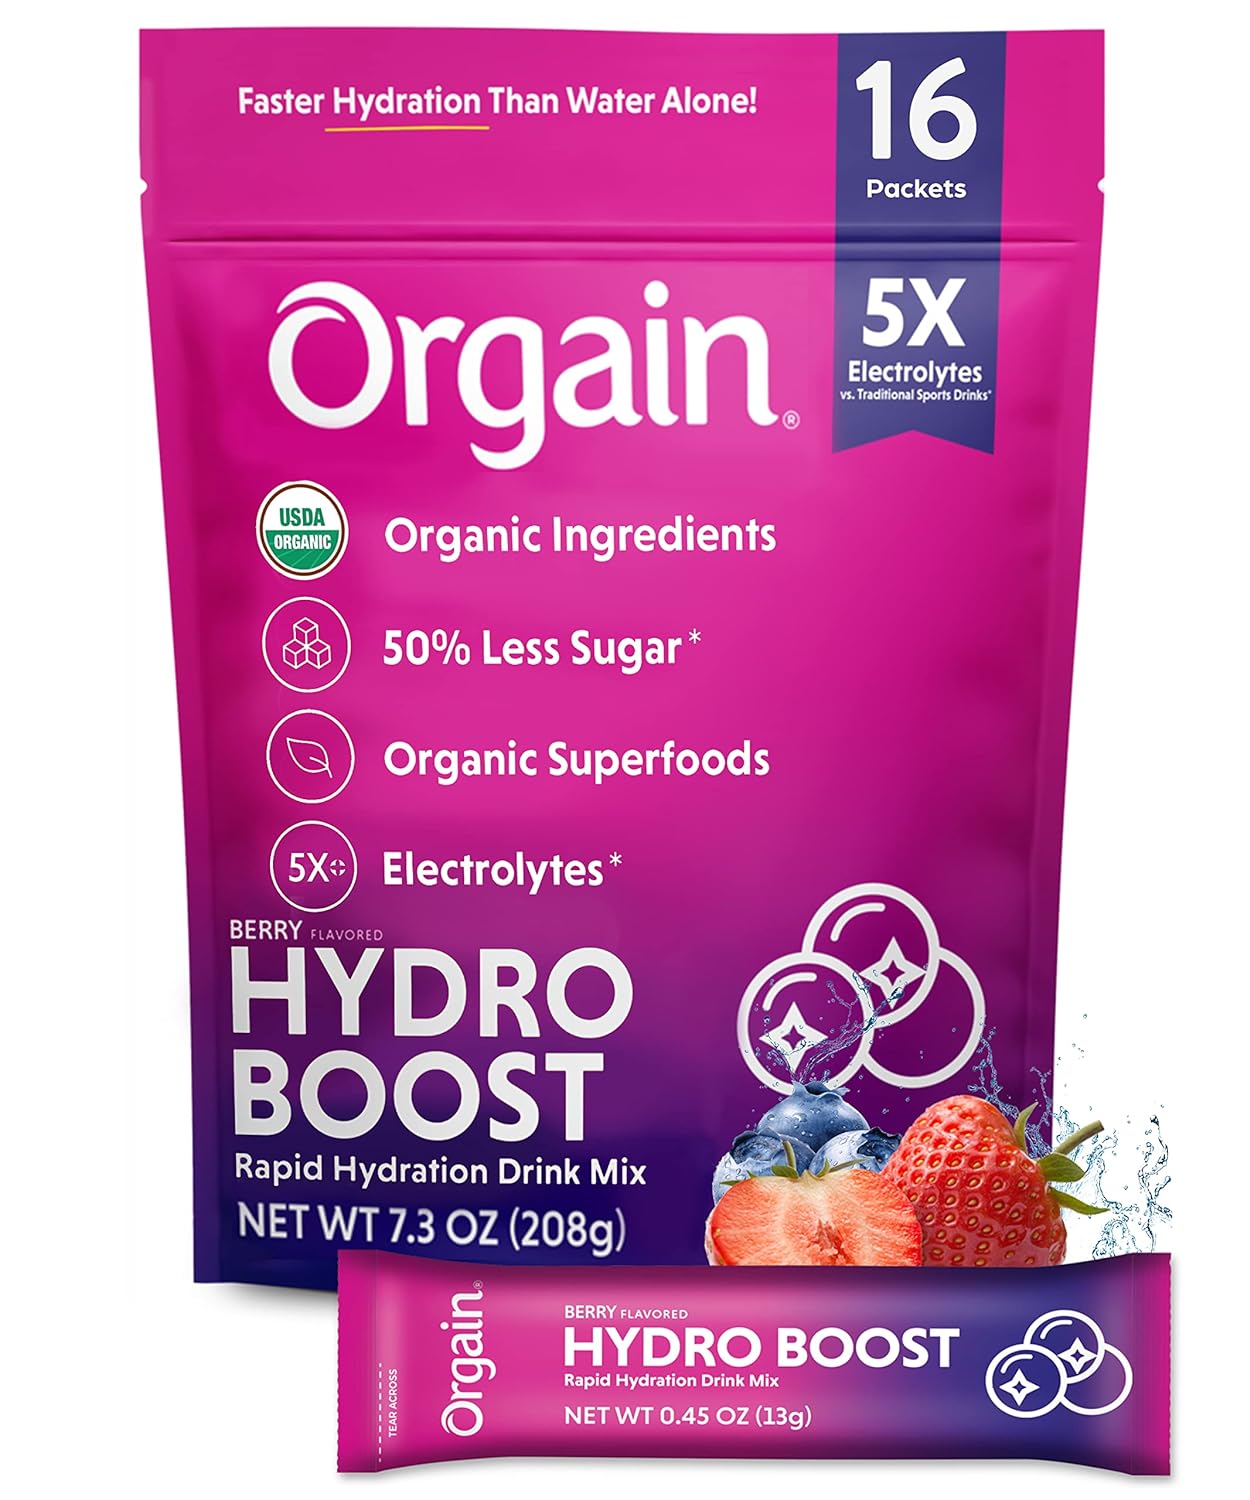 Orgain Organic Hydration Packets, Electrolytes Powder - Berry Hydro Boost with Superfoods, Gluten-Free, Soy Free, Vegan, Non GMO, Less Sugar than Sports Drinks, Travel Packets, 16 Count